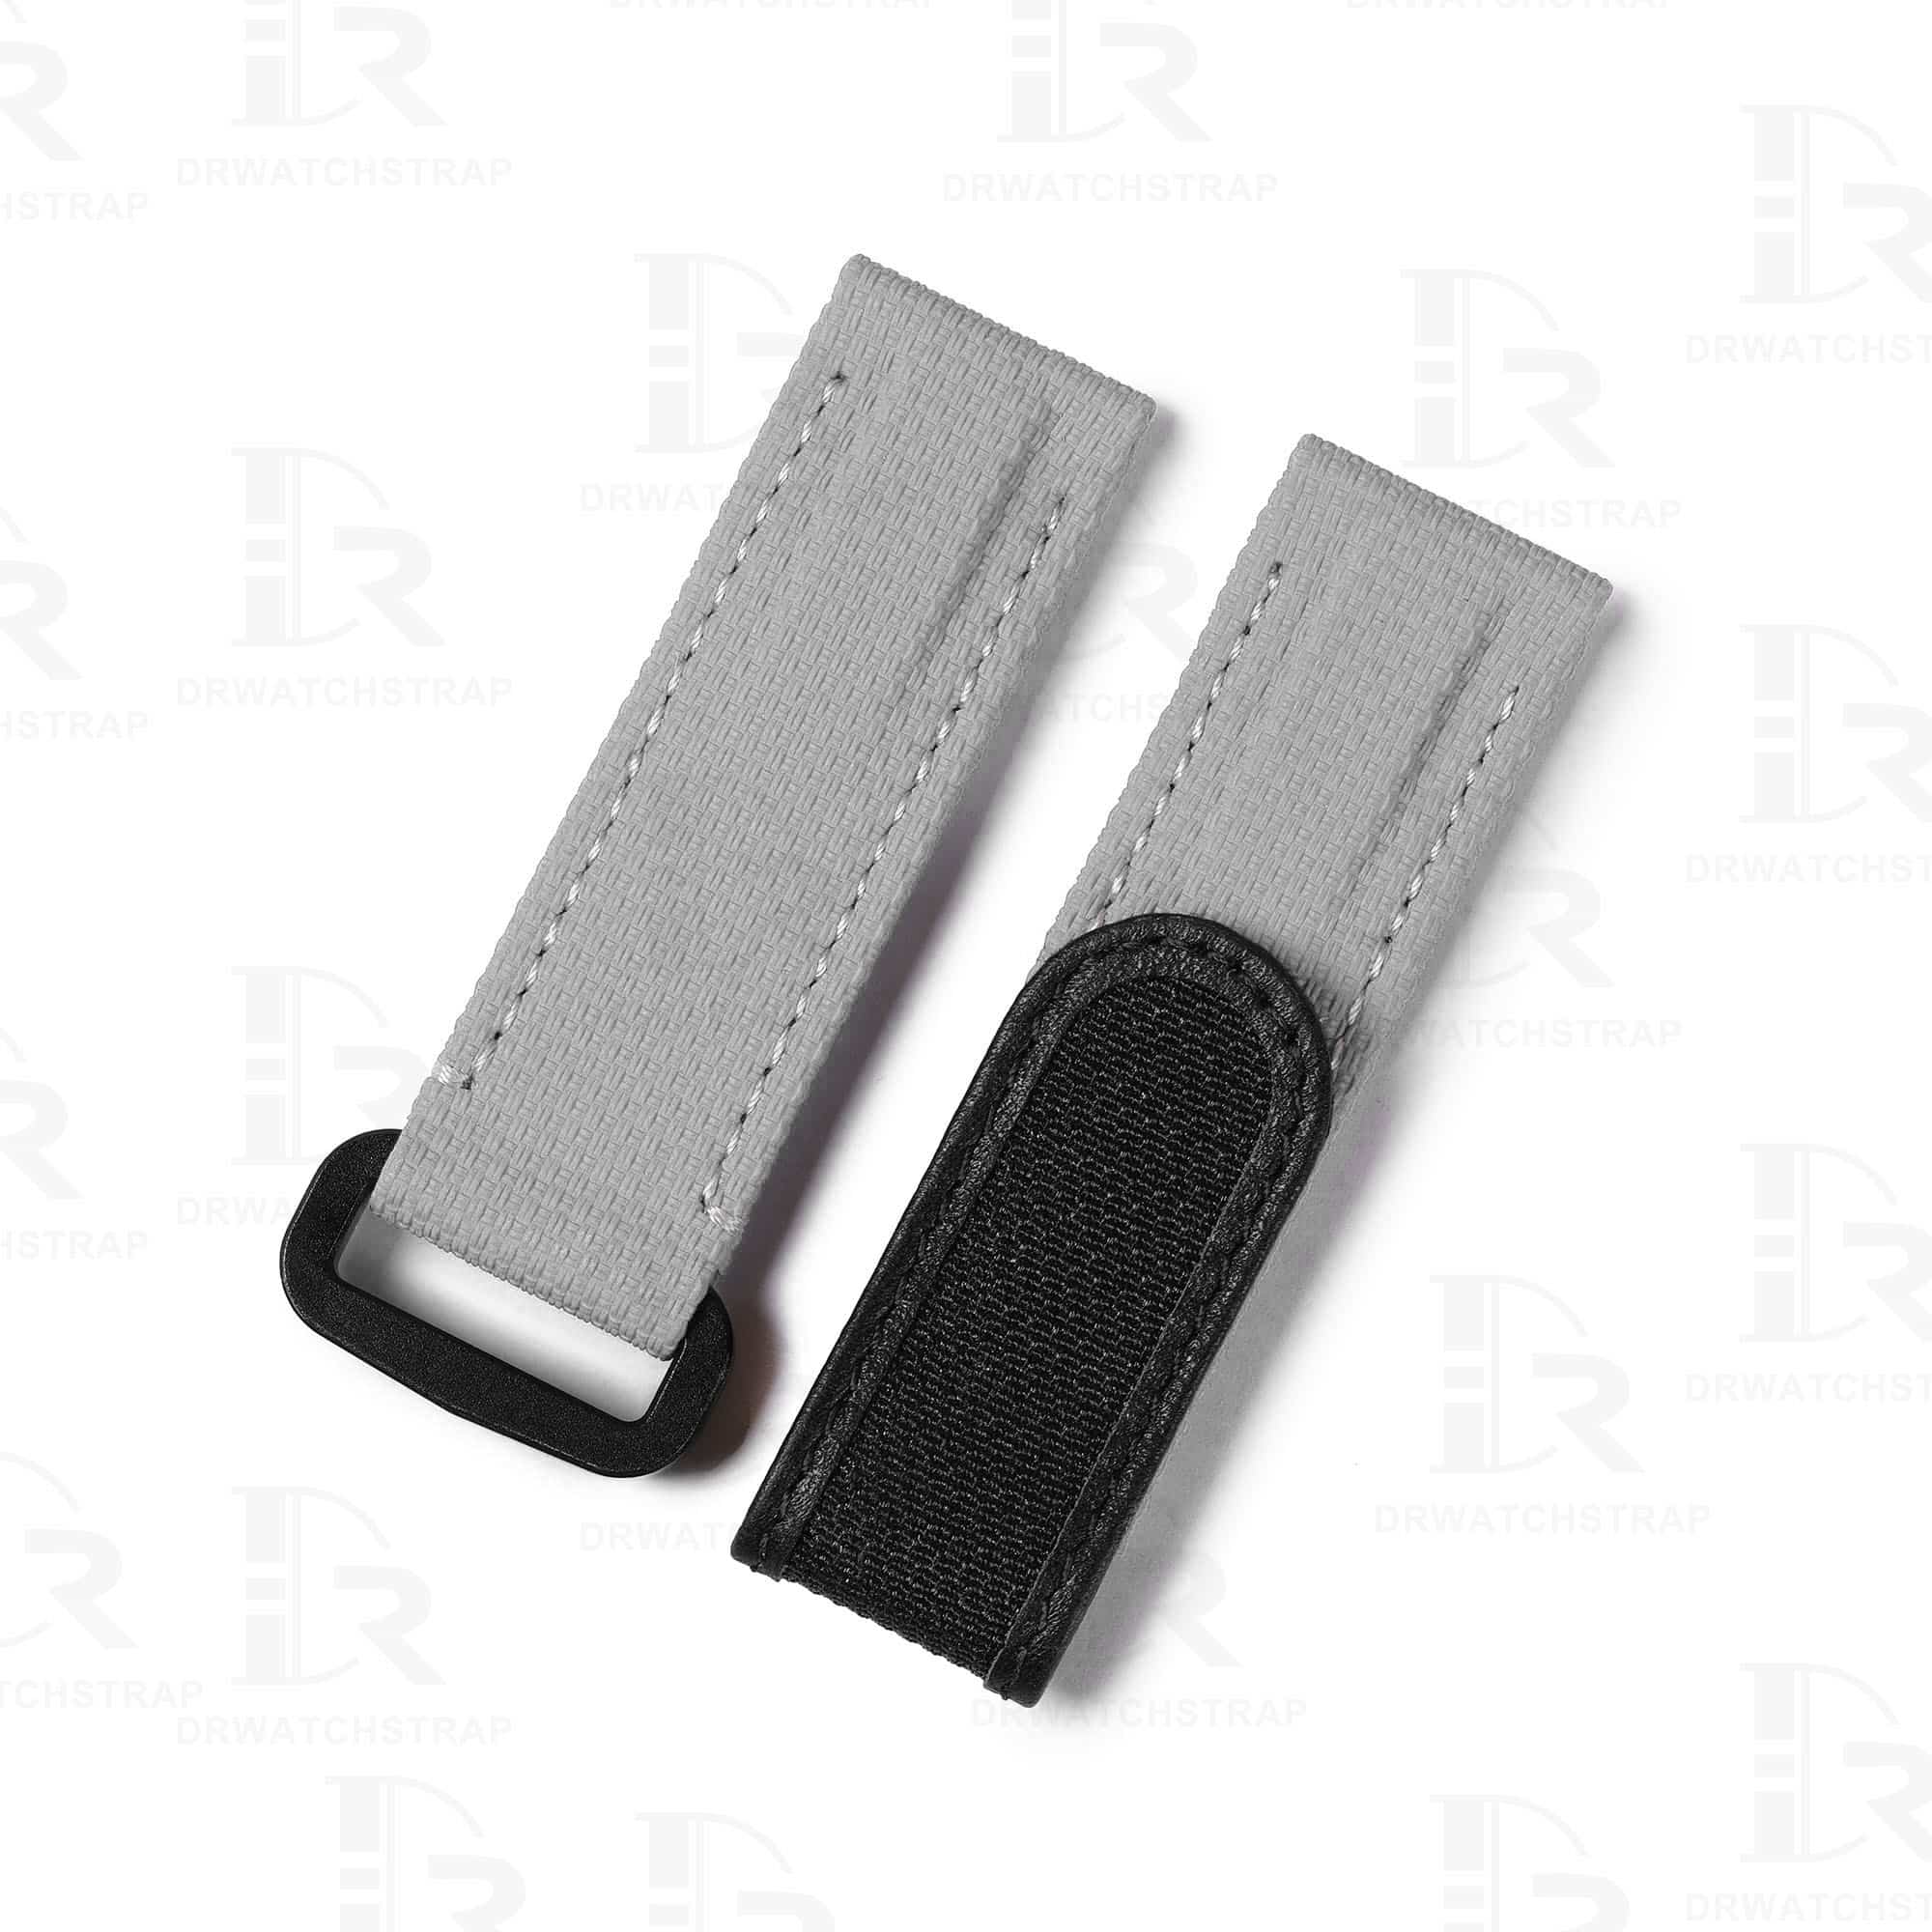 Custom best quality canvas grey replacement velcro rubber watch strap and watch band online for Rolex, Blancpain, Omega, and any other man or women watches with flat ends watch bands replacement from DRwatchstrap at a low price